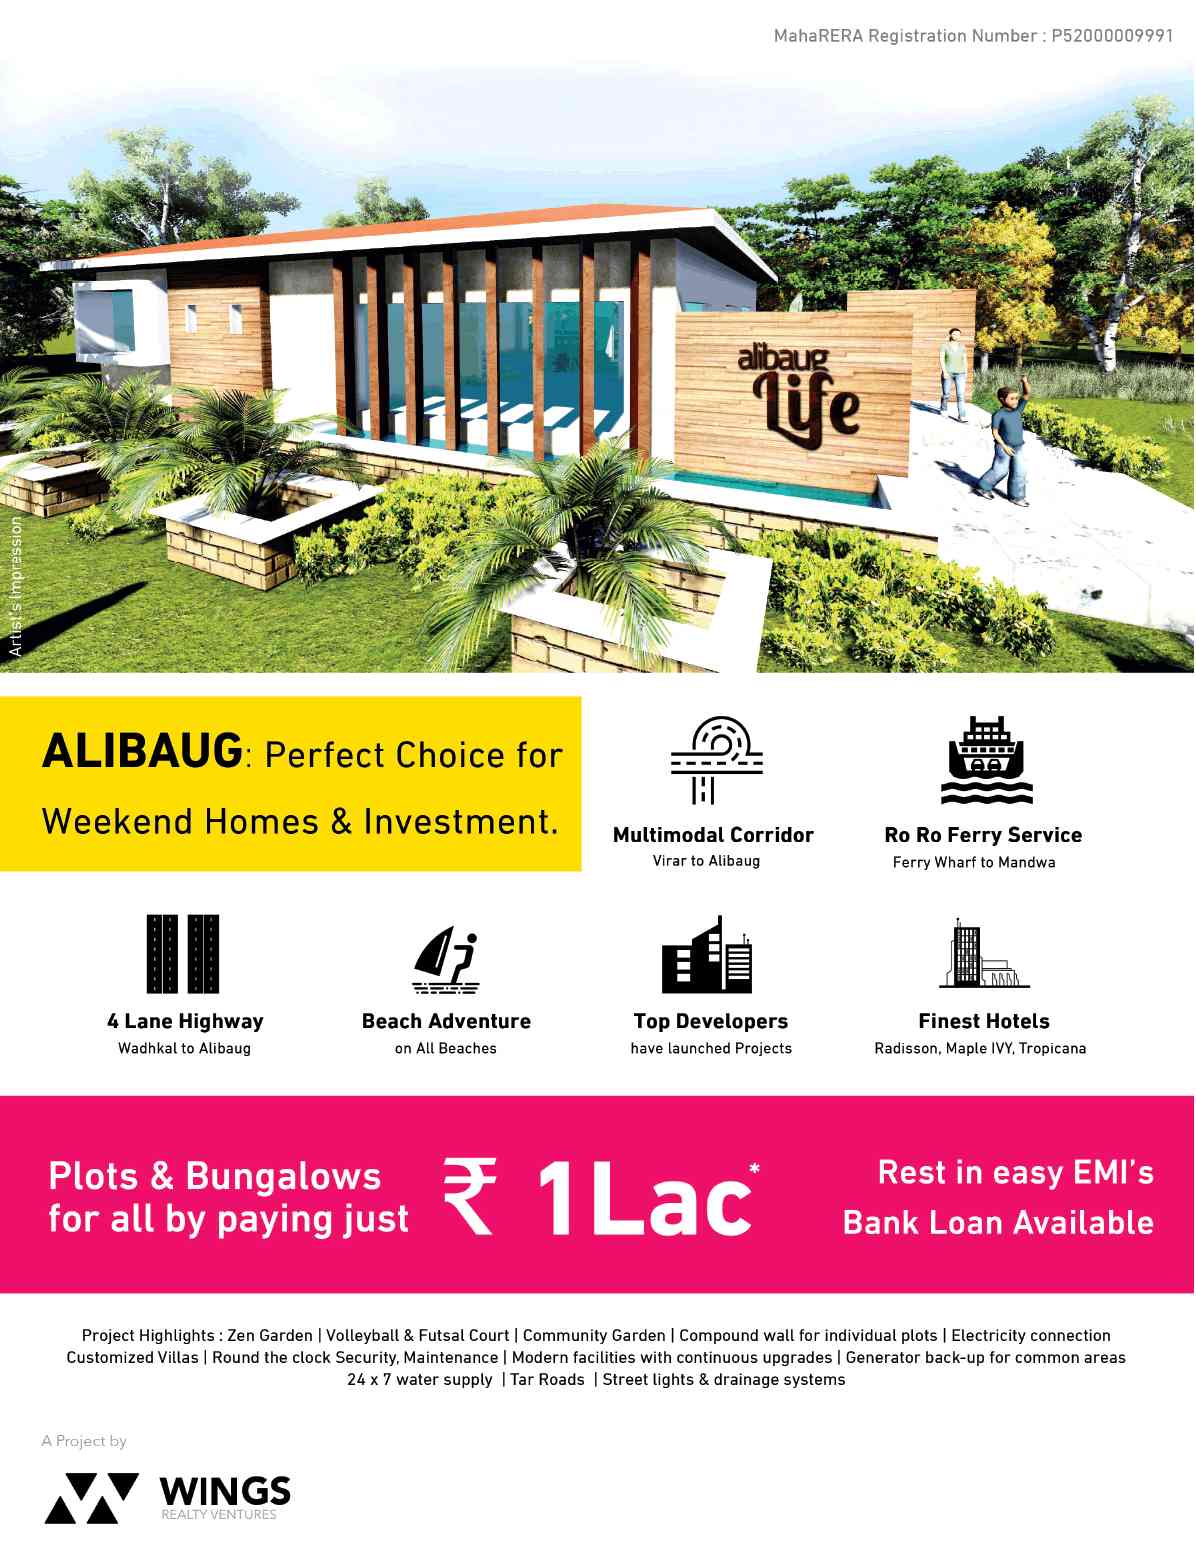 Wings Alibaug Life is the perfect choice for weekend homes & investment in Mumbai Update